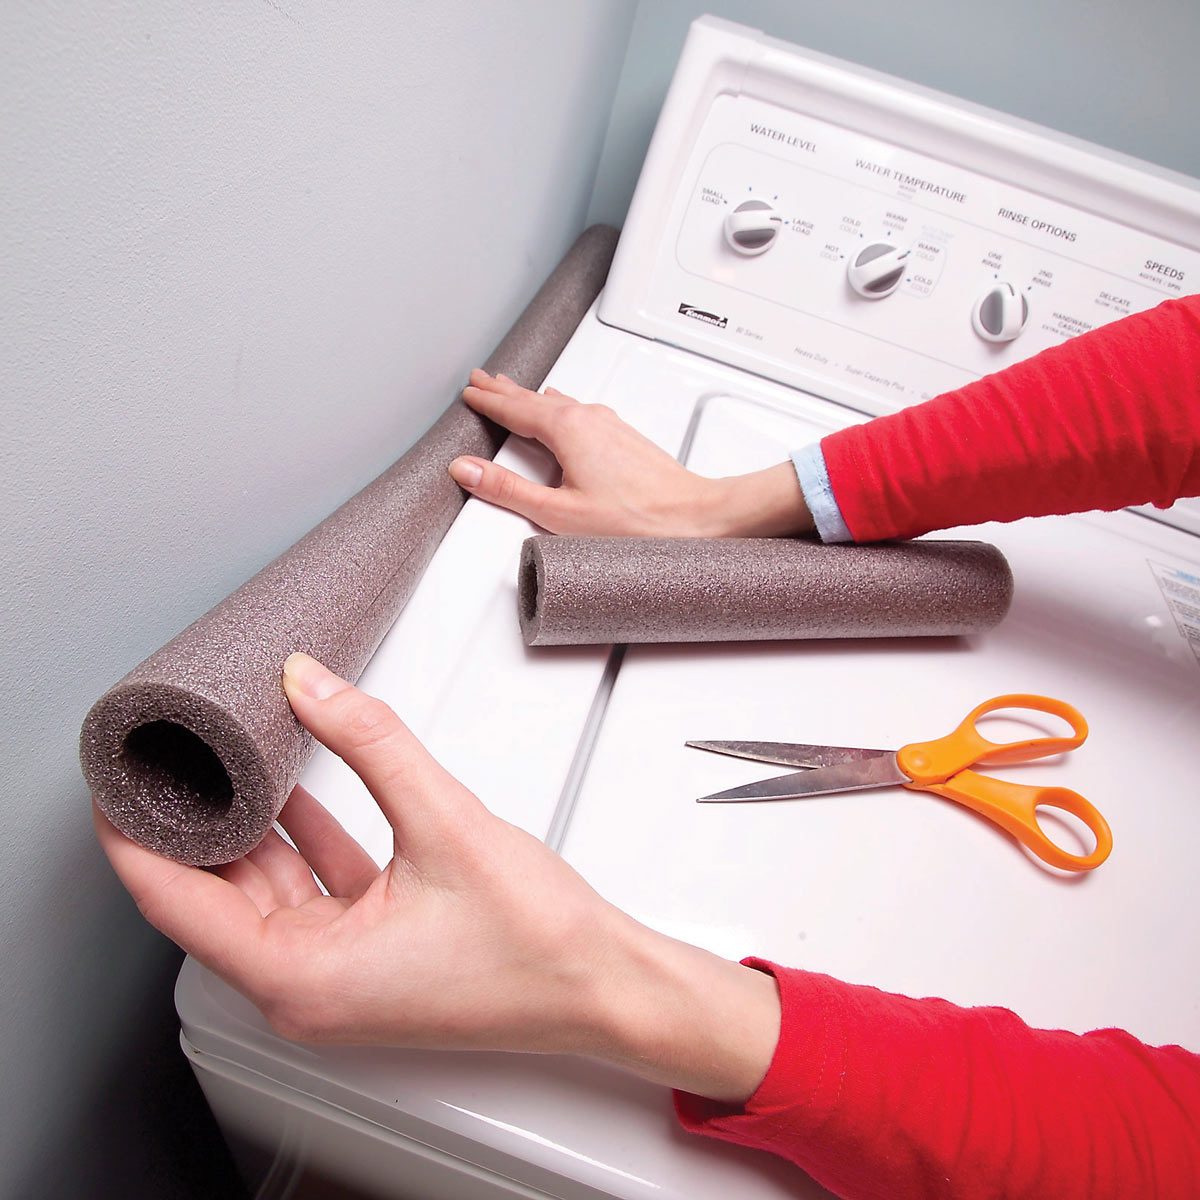 Amazing DIY Home Hacks to Ease Your Life